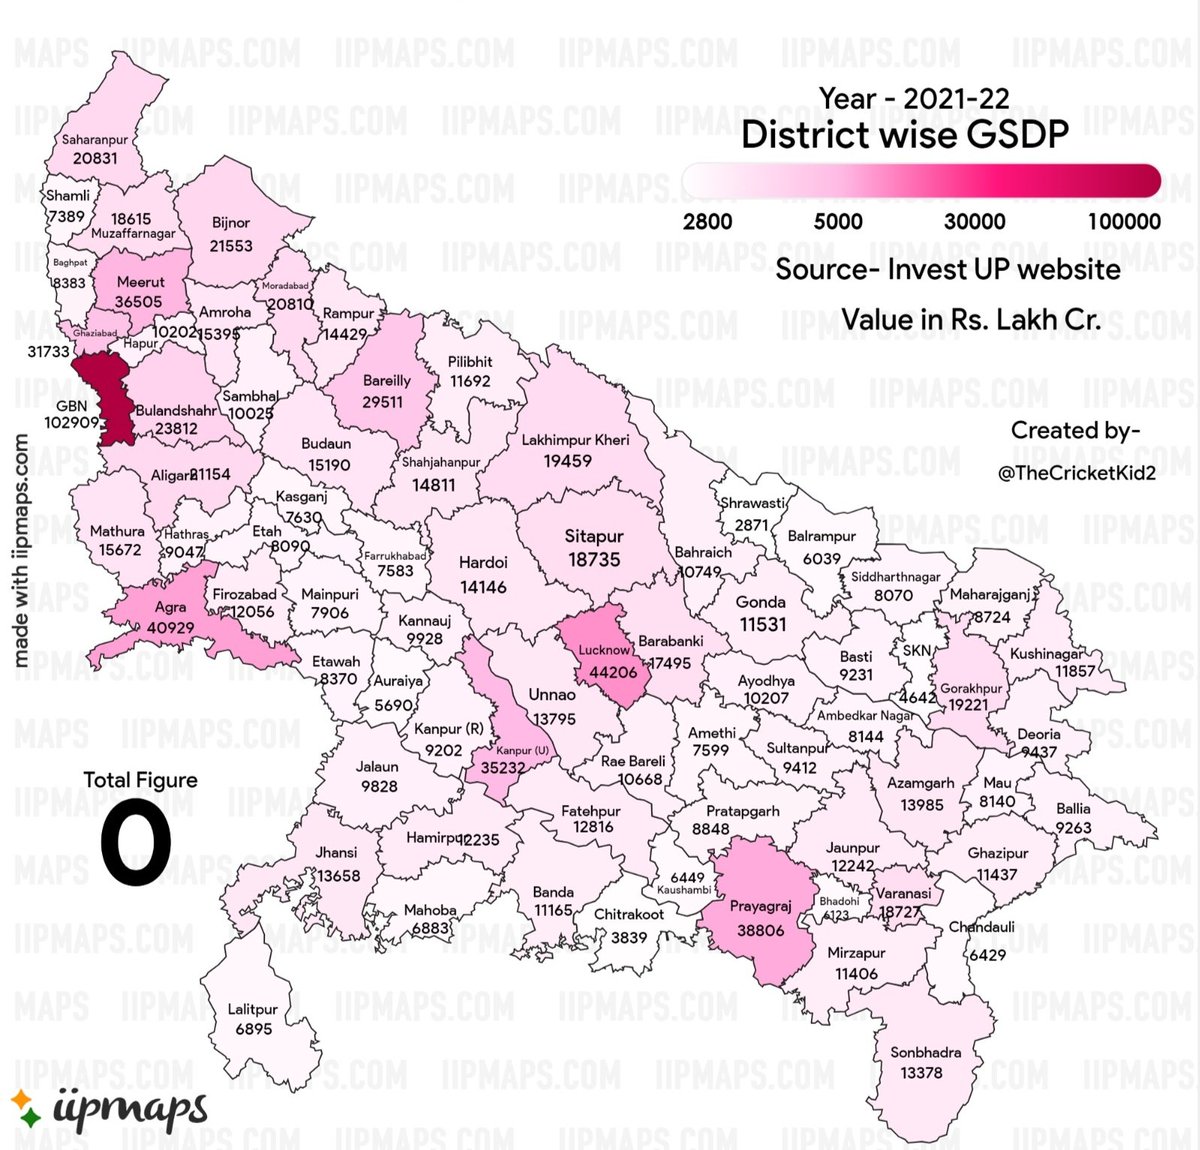 District wise GSDP of UP. I will update the map as soon as new data is available.

1.GBN(Noida)
2.Lucknow
3.Agra
4.Prayagraj

@theupindex @indiainpixels @gemsofbabus_